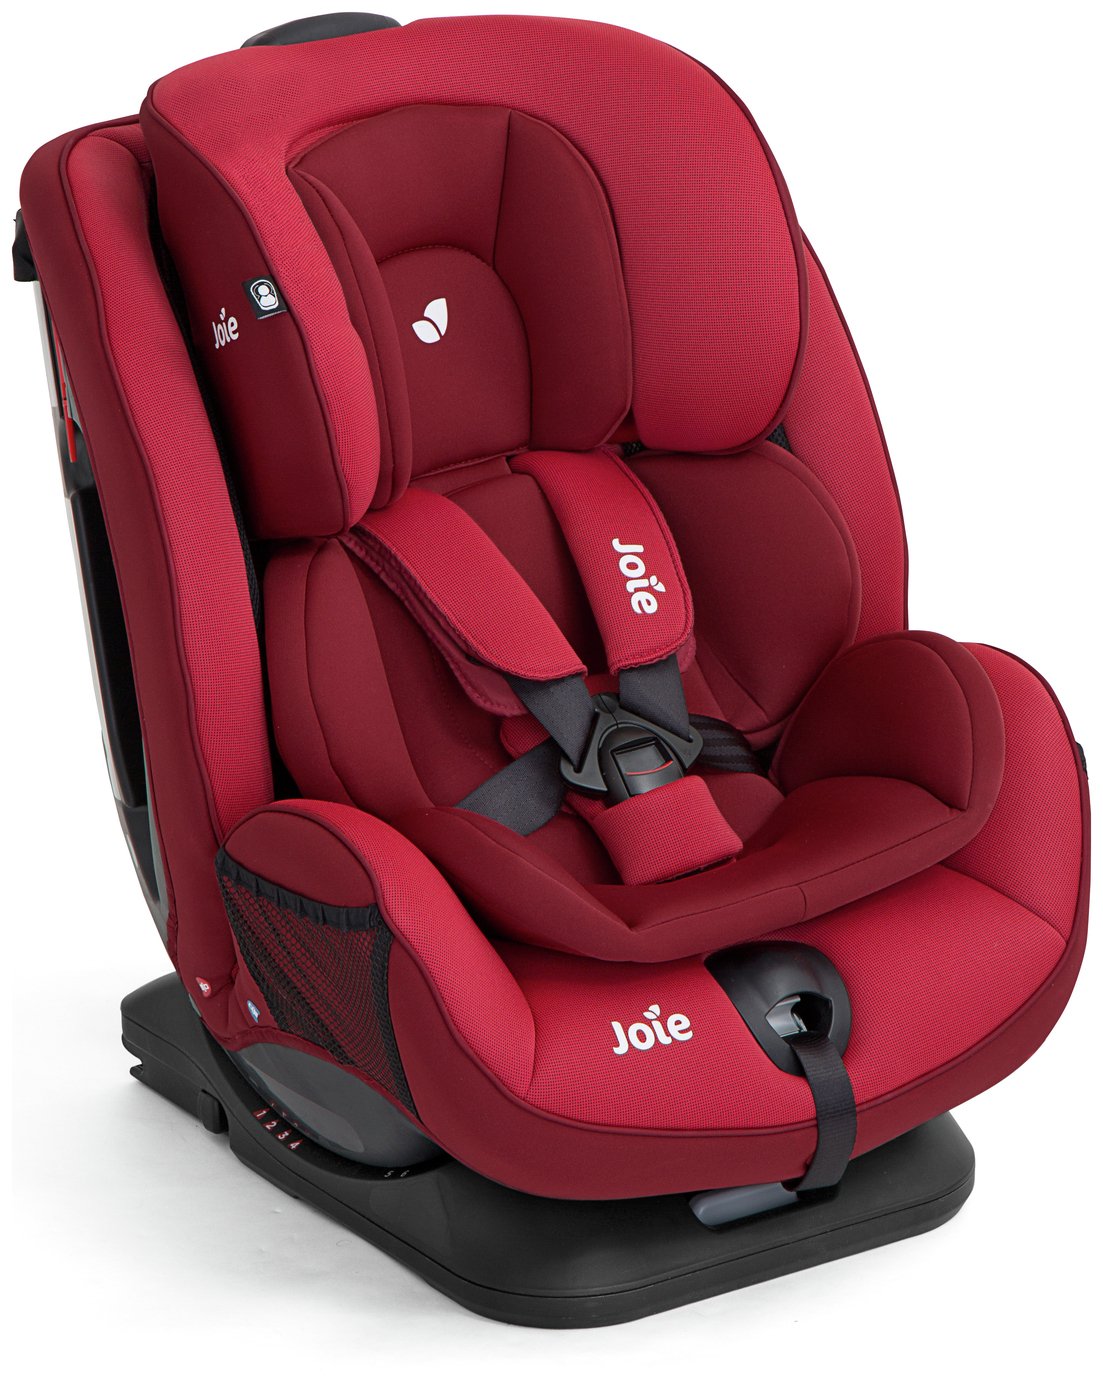 Joie Stages FX Group 0+/1/2 ISOFIX Car Seat - Lychee